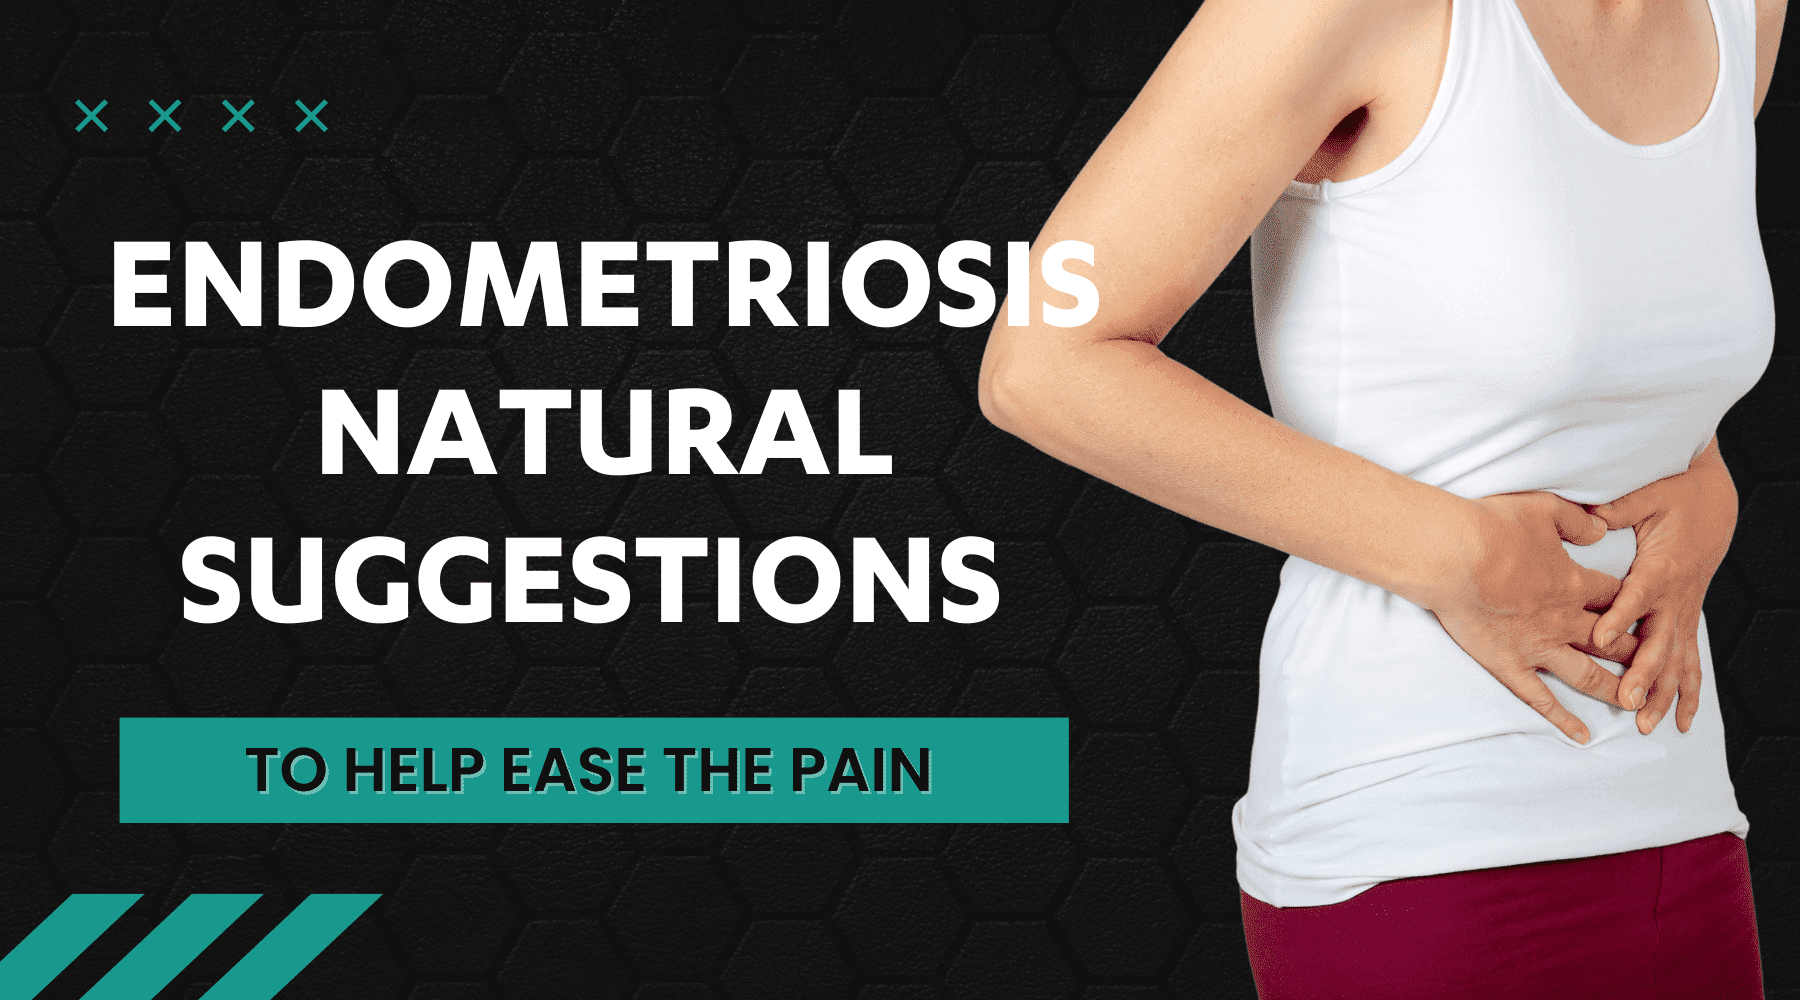 Endometriosis - Natural suggestions to help ease the pain - Dr Kez Chirolab 